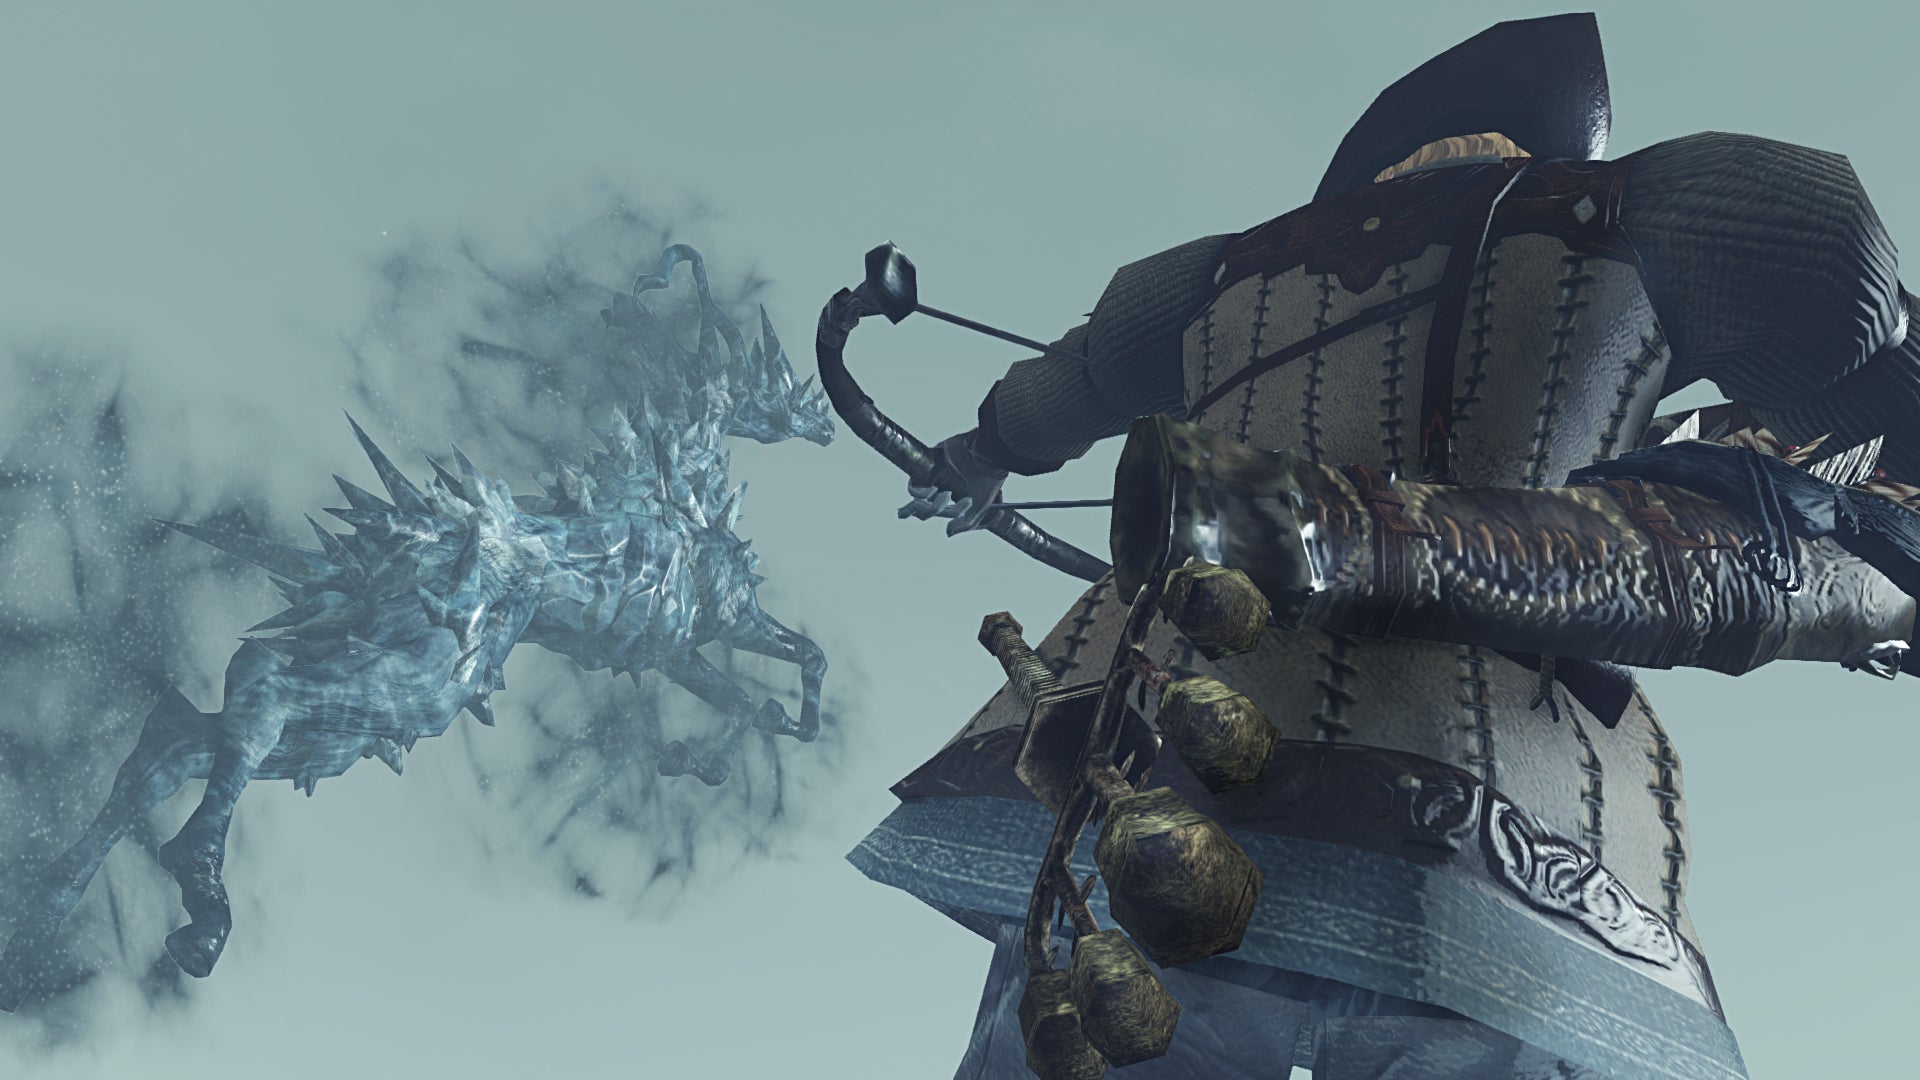 Image for Darks Souls 2 guide: Crown of the Ivory King - second Knight of Eleum Loyce location